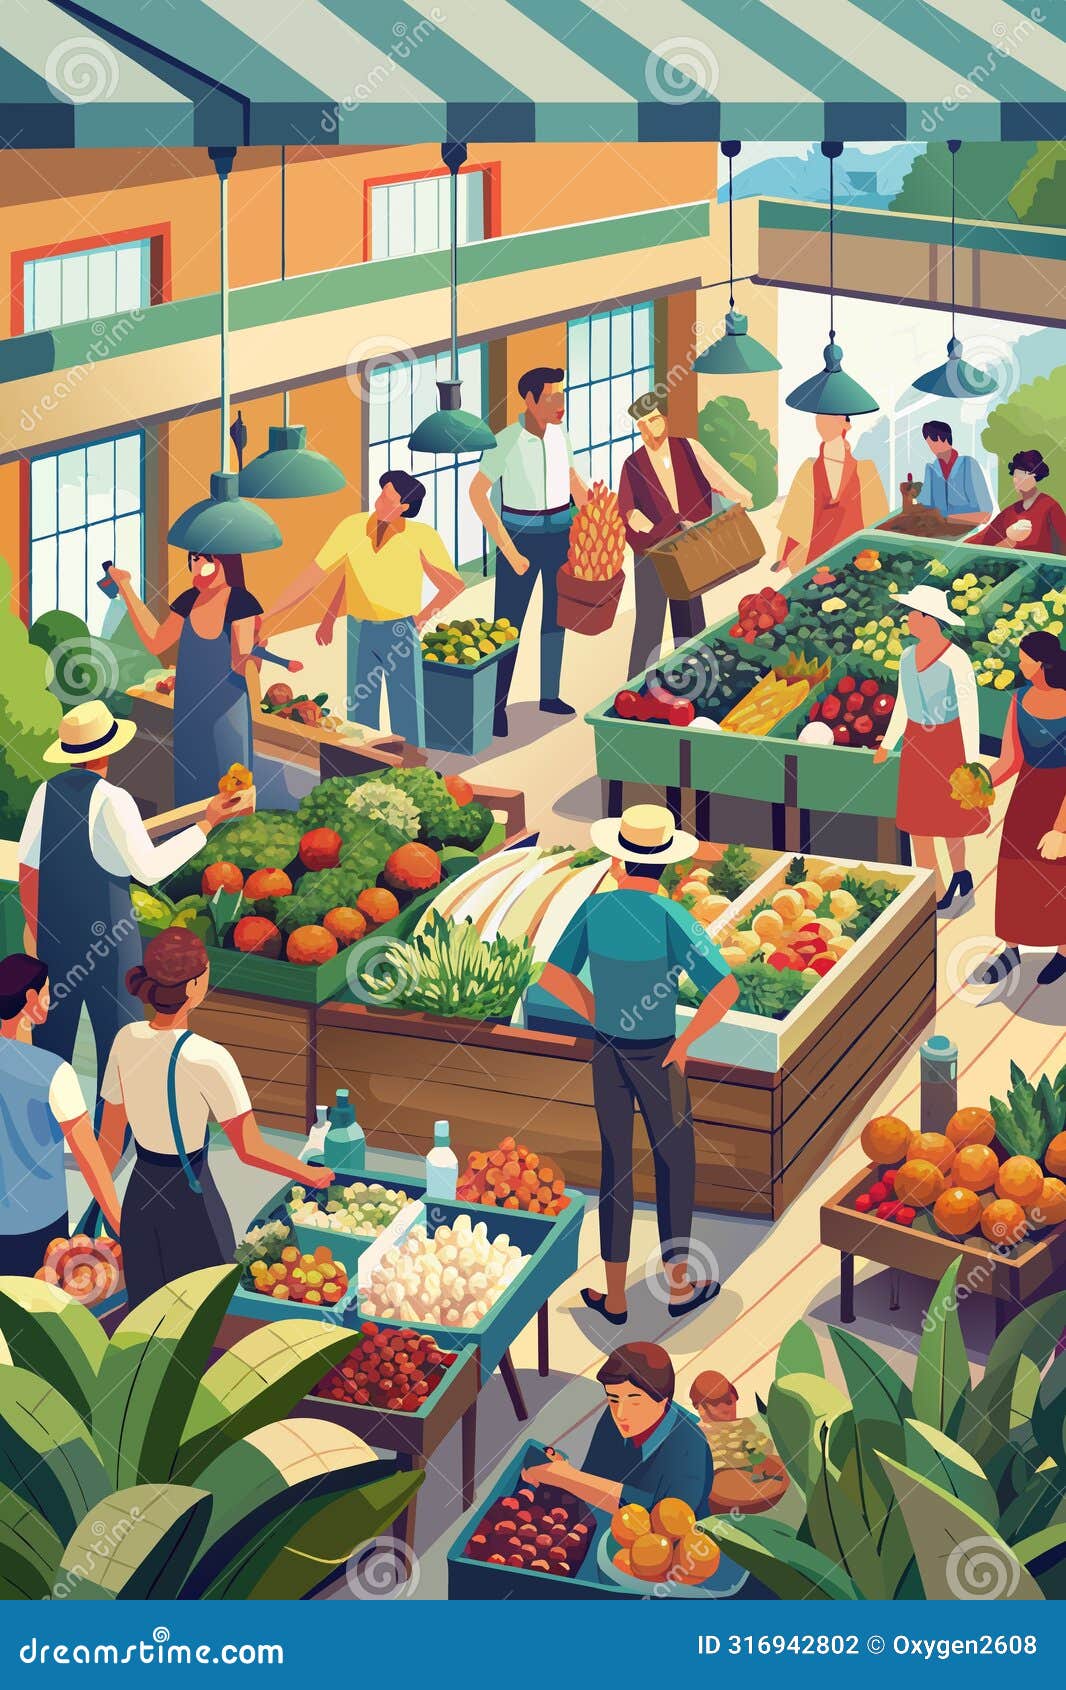 bustling farmers market scene with fresh produce and shoppers